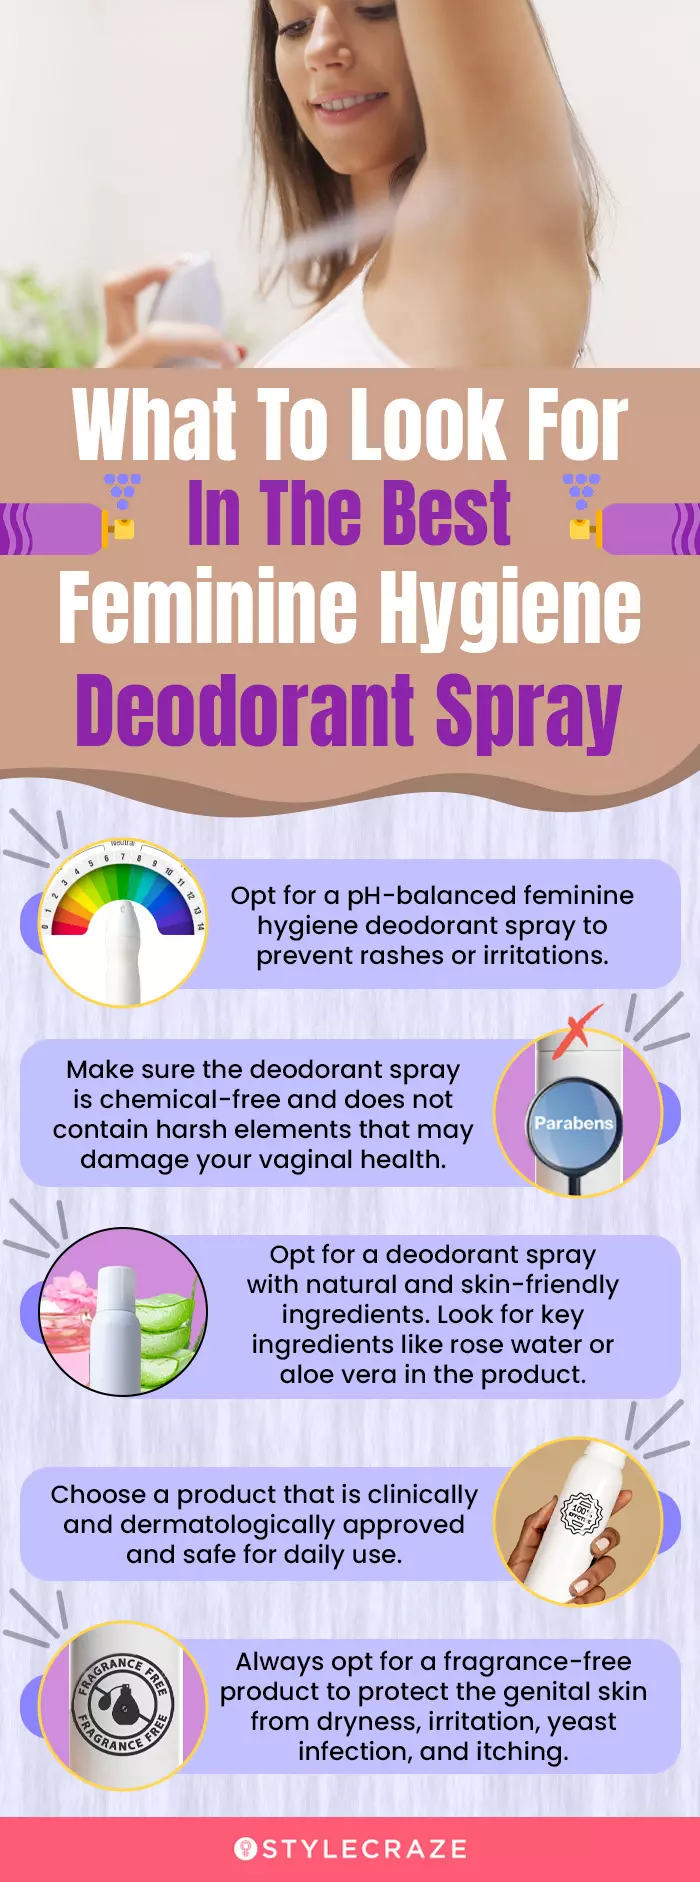 What To Look For In The Best Feminine Hygiene Deodorant Spray (infographic)